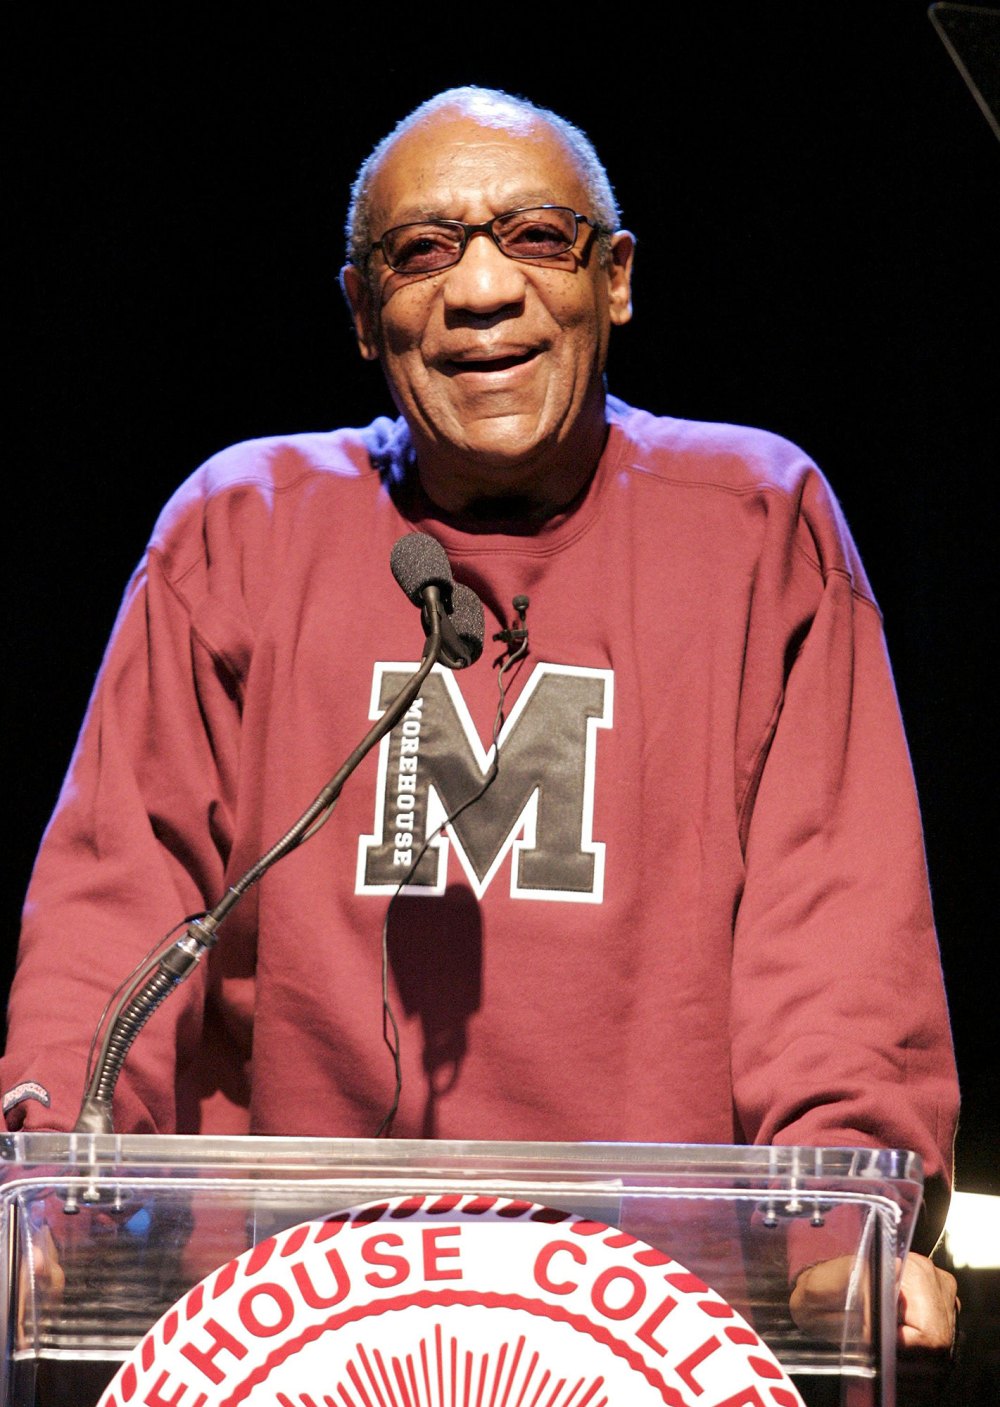 Bill Cosby Breaks Silence Following Rape Allegations, Says “Thank You” to Supporters like Whoopi Goldberg